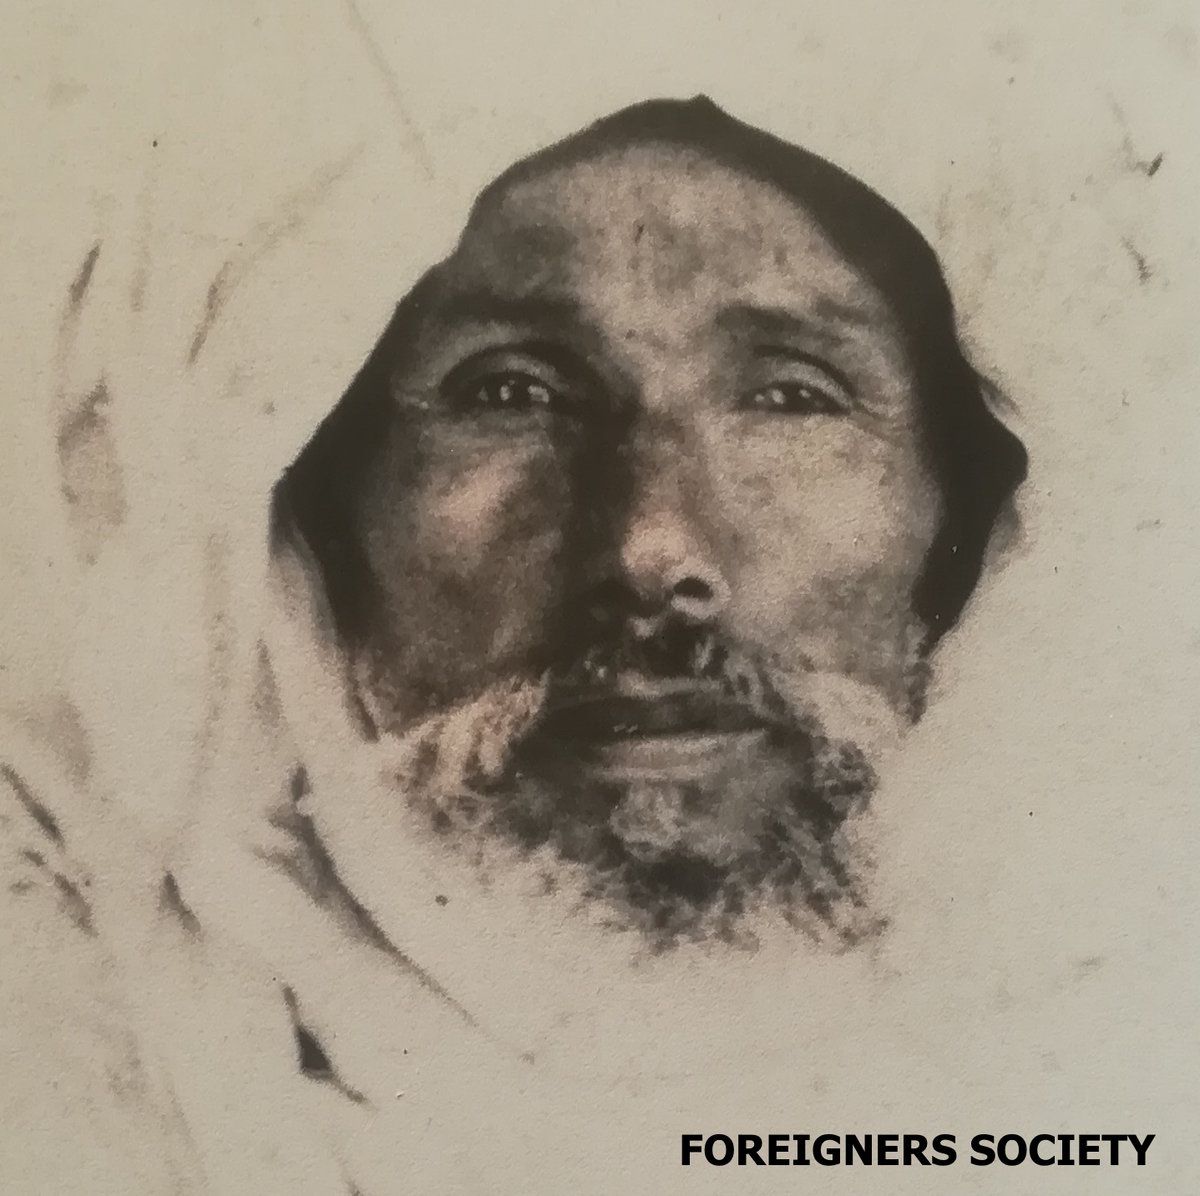 Parisian Psych Noise newcomers Foreigners Society have dropped their grittily despondent latest single